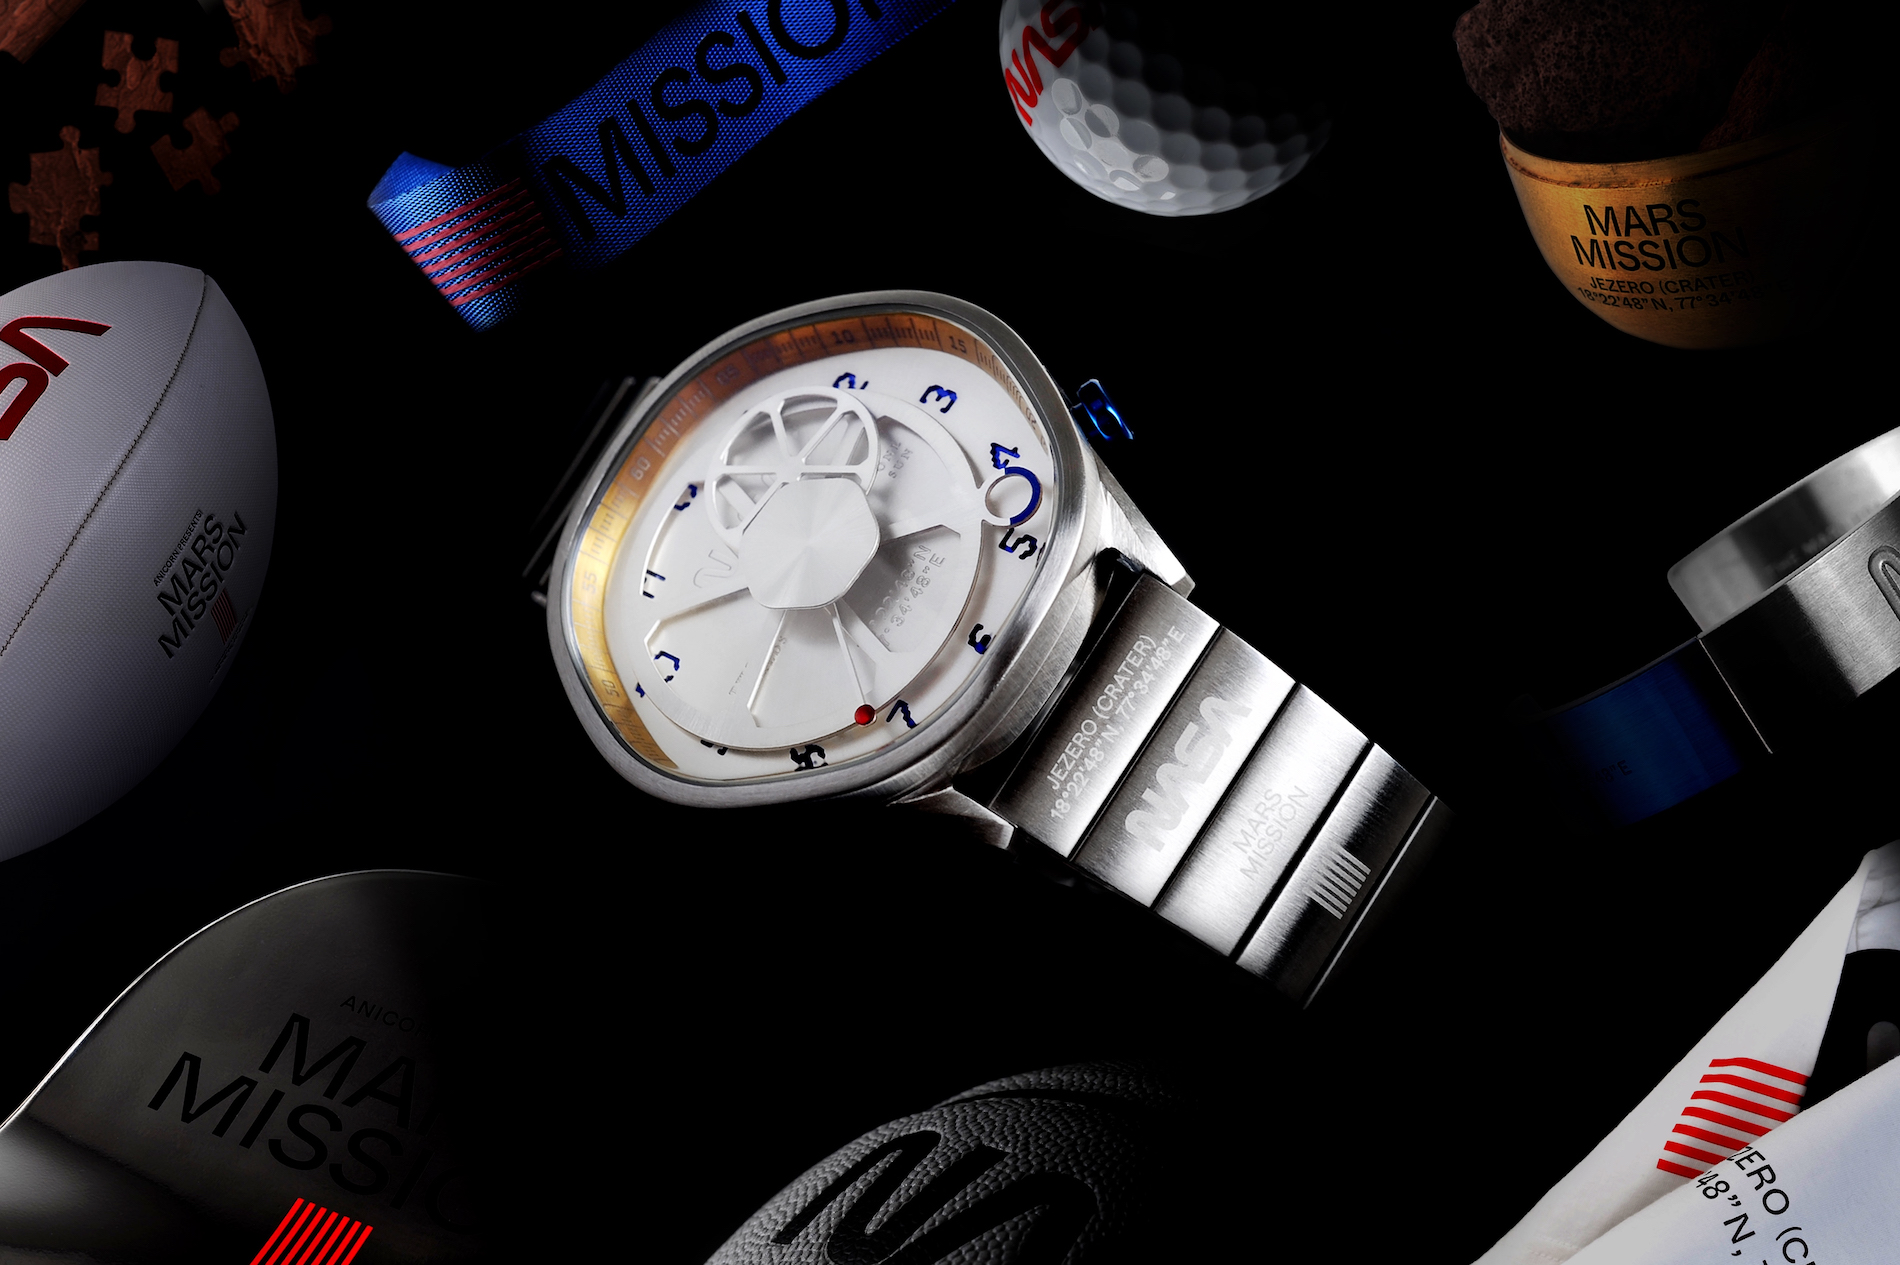 ANICORN Watches + NASA limited MARS MISSION Collection #Want